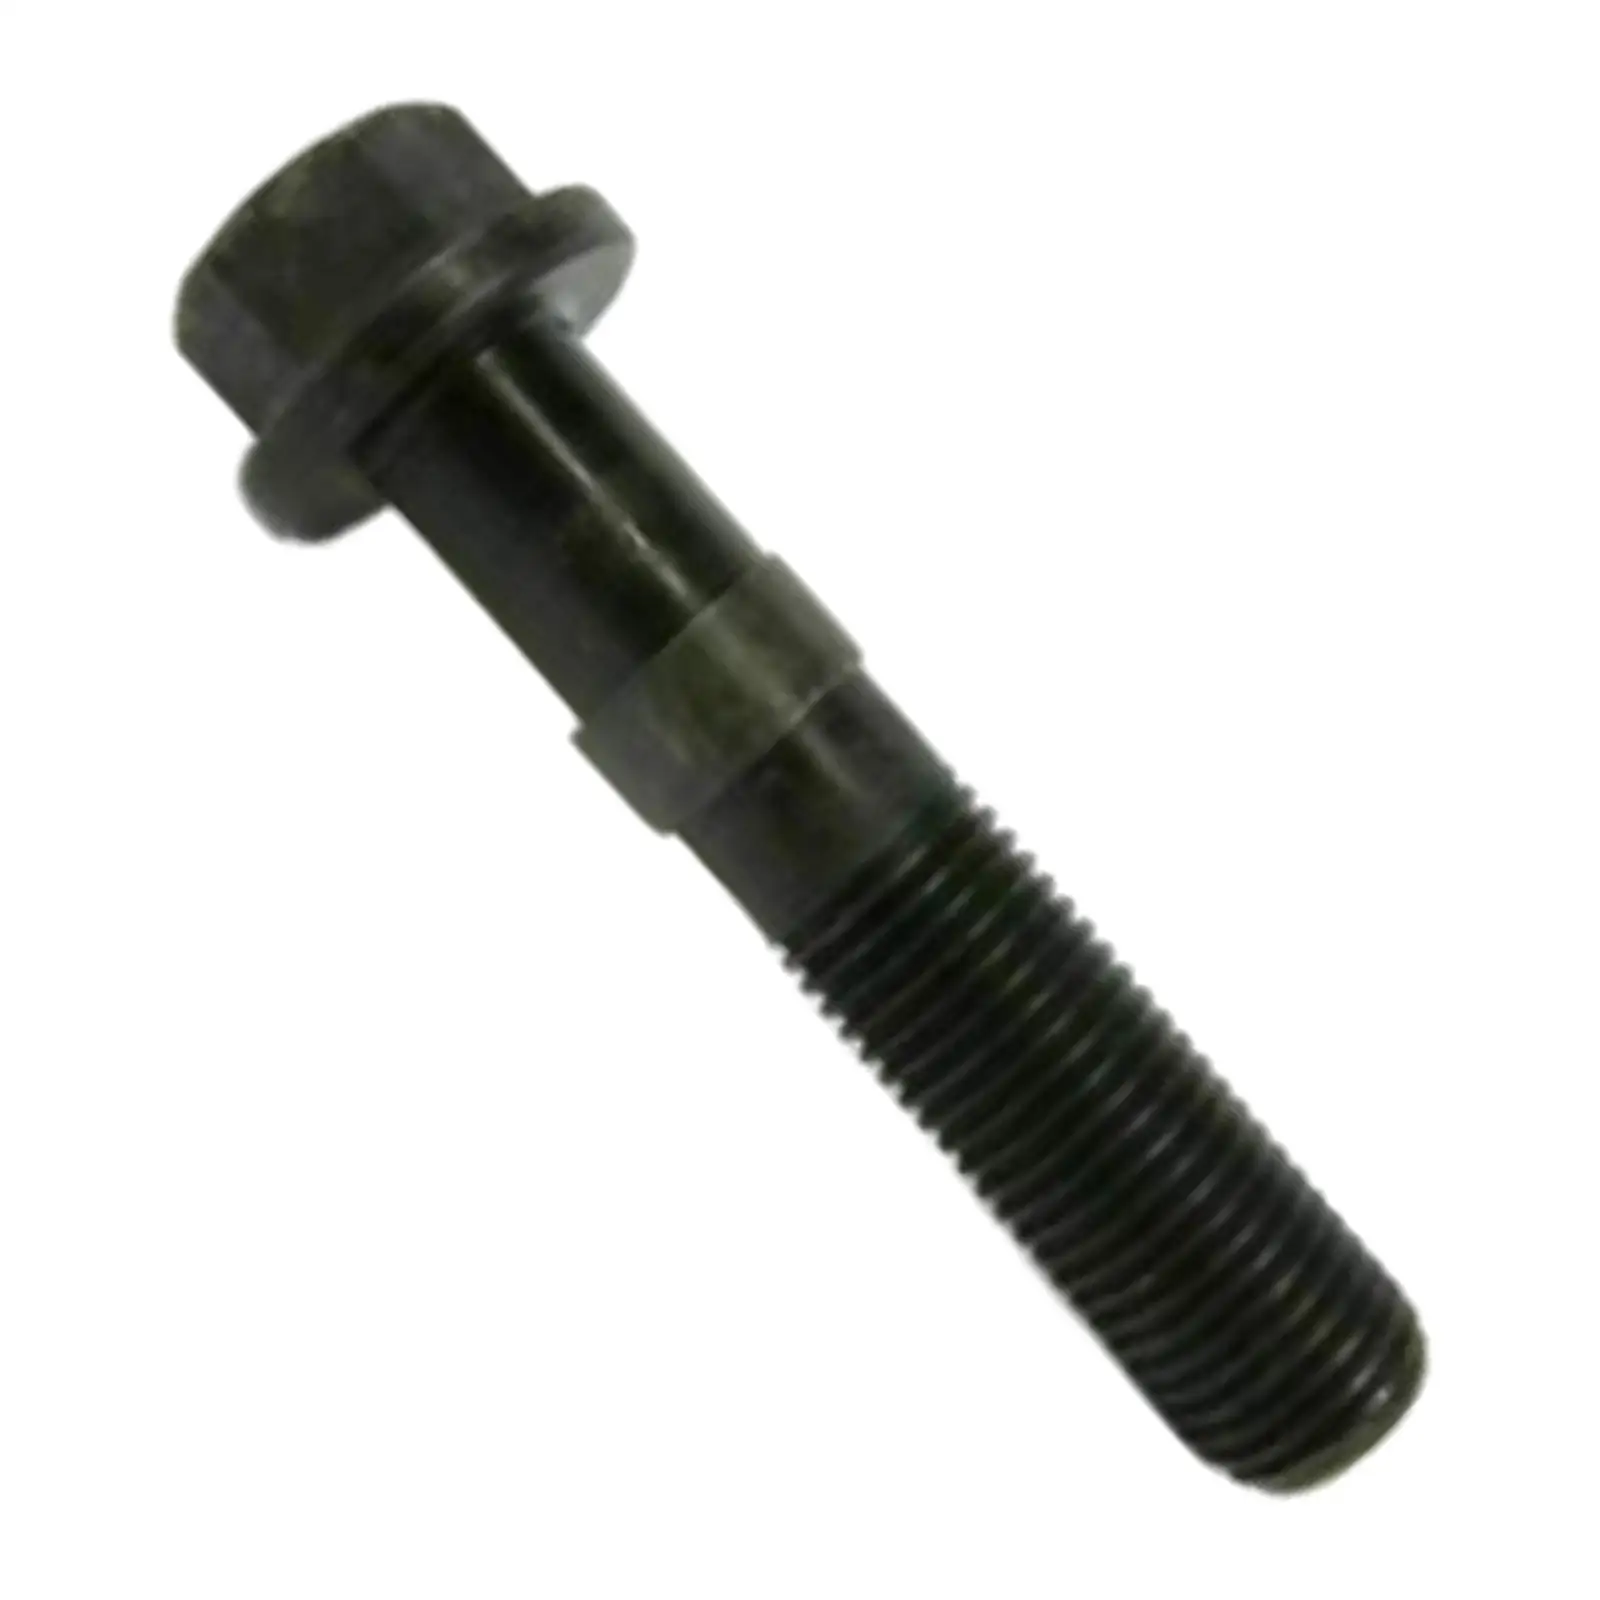 Engine Connecting Rod Bolt Accessories Hardware Replacement ,Bush Screw, Fits for  300 06508504AA 06504720 Car Supplies 